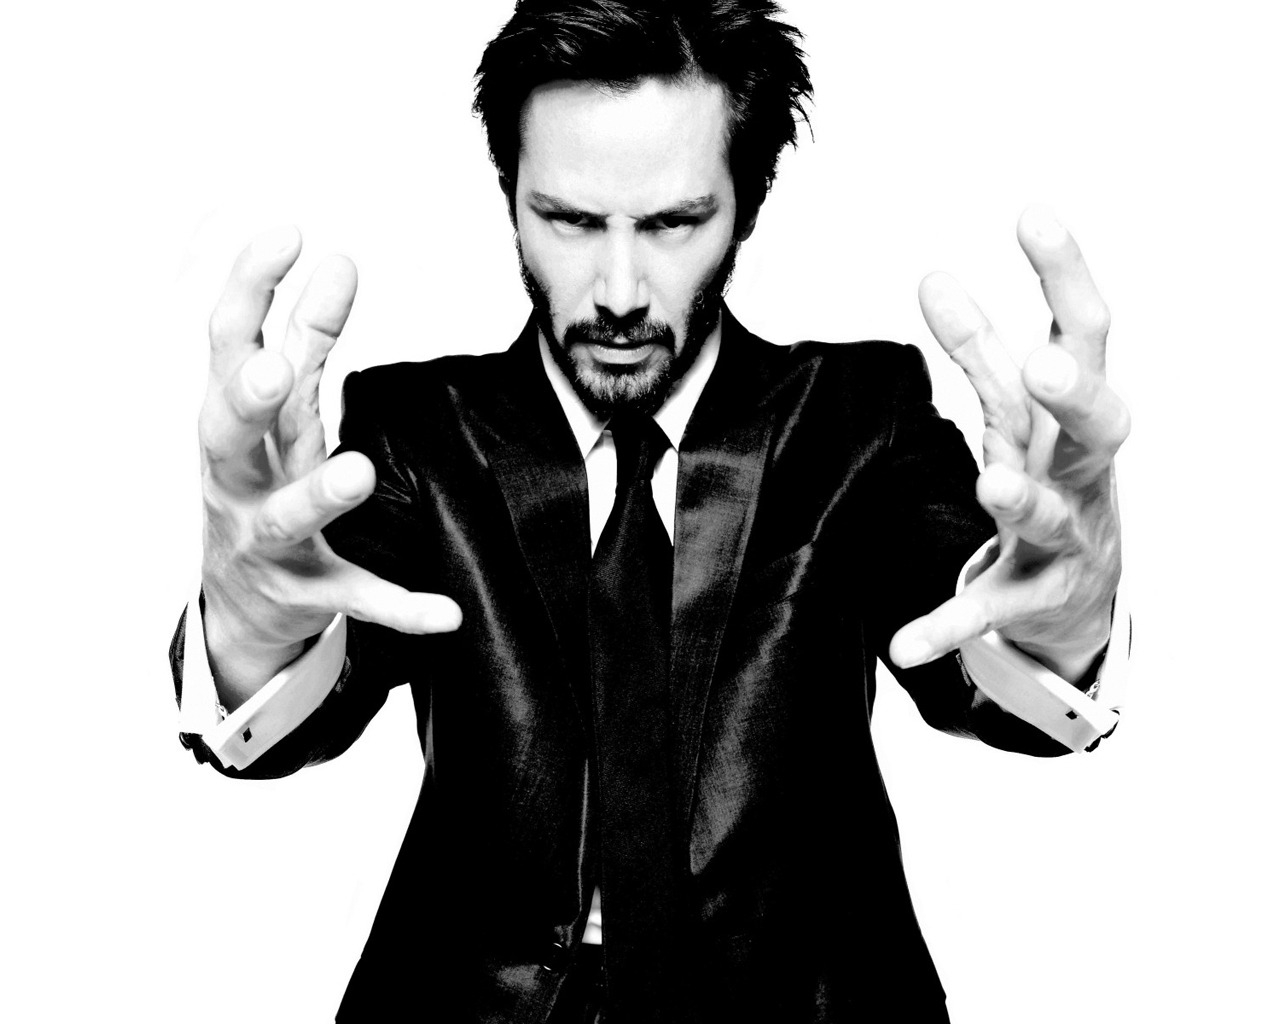 Keanu Reeves Mad for 1280 x 1024 resolution